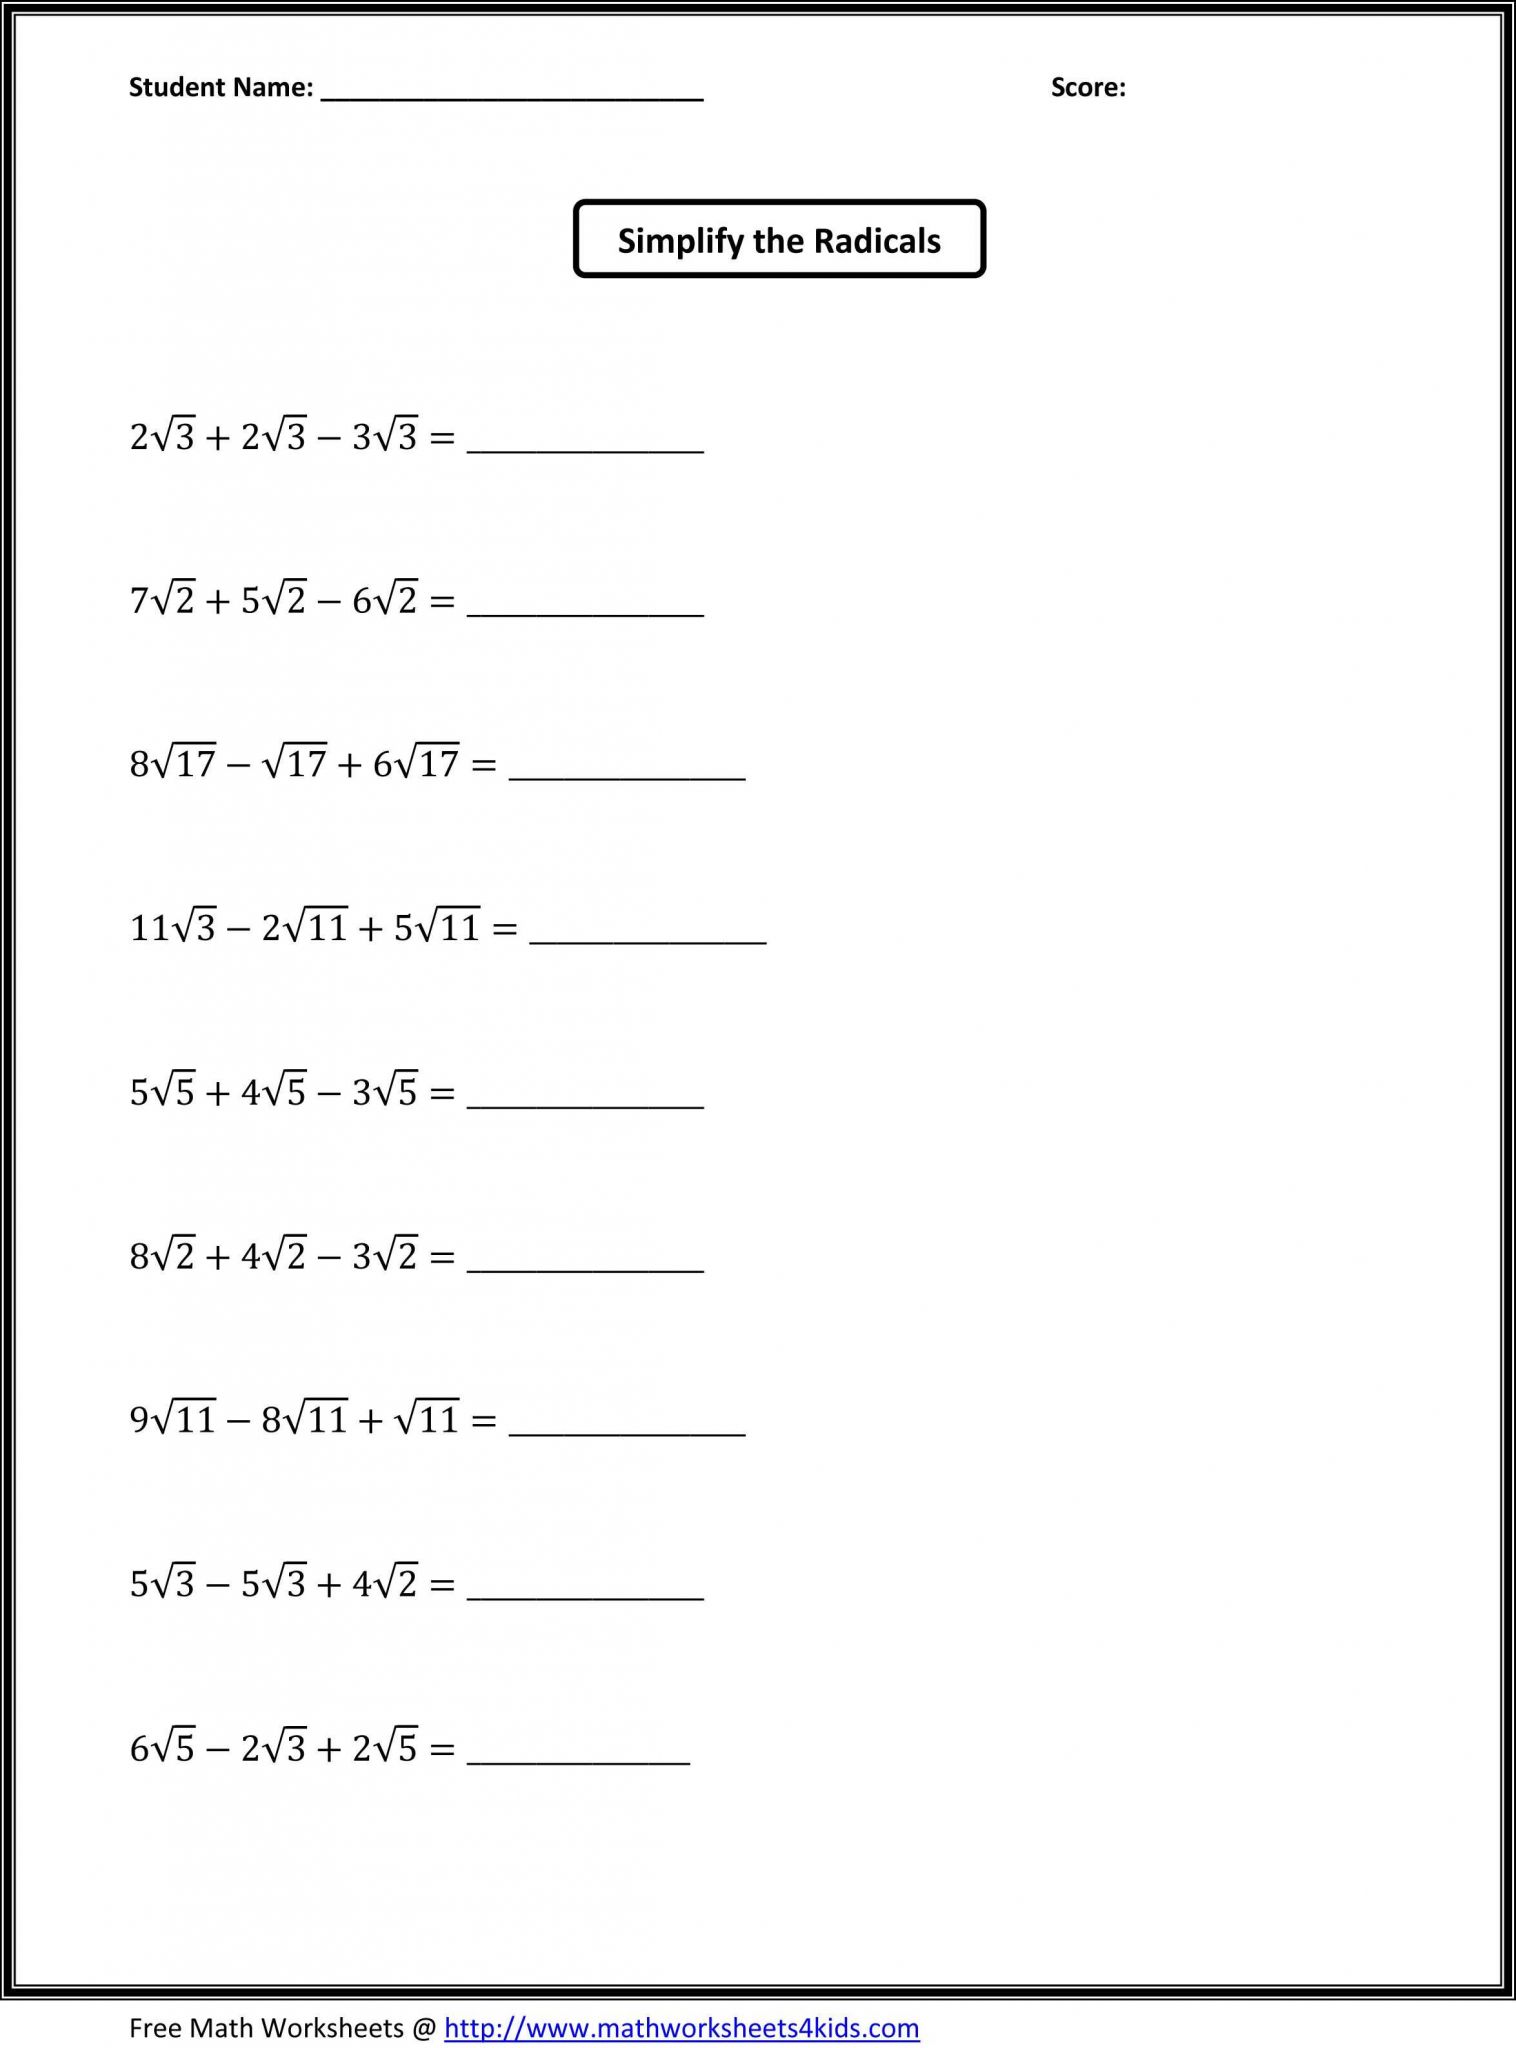 Markup and Discount Worksheet as Well as 7th Grade Math Work Beautiful 7th Grade English Worksheets Printable